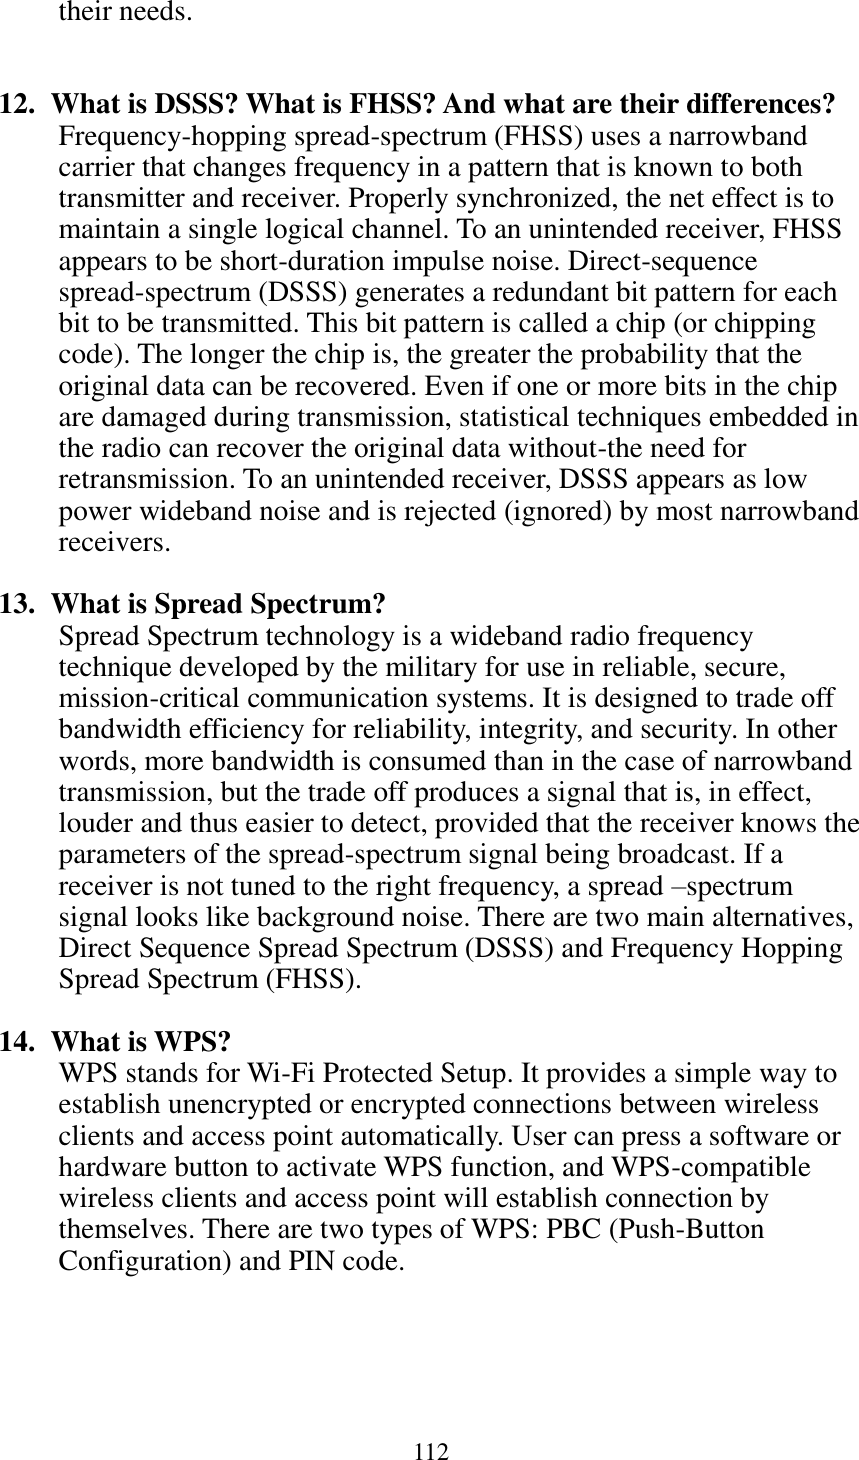 112  their needs.   12.   What is DSSS? What is FHSS? And what are their differences? Frequency-hopping spread-spectrum (FHSS) uses a narrowband carrier that changes frequency in a pattern that is known to both transmitter and receiver. Properly synchronized, the net effect is to maintain a single logical channel. To an unintended receiver, FHSS appears to be short-duration impulse noise. Direct-sequence spread-spectrum (DSSS) generates a redundant bit pattern for each bit to be transmitted. This bit pattern is called a chip (or chipping code). The longer the chip is, the greater the probability that the original data can be recovered. Even if one or more bits in the chip are damaged during transmission, statistical techniques embedded in the radio can recover the original data without-the need for retransmission. To an unintended receiver, DSSS appears as low power wideband noise and is rejected (ignored) by most narrowband receivers.  13.   What is Spread Spectrum? Spread Spectrum technology is a wideband radio frequency technique developed by the military for use in reliable, secure, mission-critical communication systems. It is designed to trade off bandwidth efficiency for reliability, integrity, and security. In other words, more bandwidth is consumed than in the case of narrowband transmission, but the trade off produces a signal that is, in effect, louder and thus easier to detect, provided that the receiver knows the parameters of the spread-spectrum signal being broadcast. If a receiver is not tuned to the right frequency, a spread –spectrum signal looks like background noise. There are two main alternatives, Direct Sequence Spread Spectrum (DSSS) and Frequency Hopping Spread Spectrum (FHSS).  14.   What is WPS? WPS stands for Wi-Fi Protected Setup. It provides a simple way to establish unencrypted or encrypted connections between wireless clients and access point automatically. User can press a software or hardware button to activate WPS function, and WPS-compatible wireless clients and access point will establish connection by themselves. There are two types of WPS: PBC (Push-Button Configuration) and PIN code. 